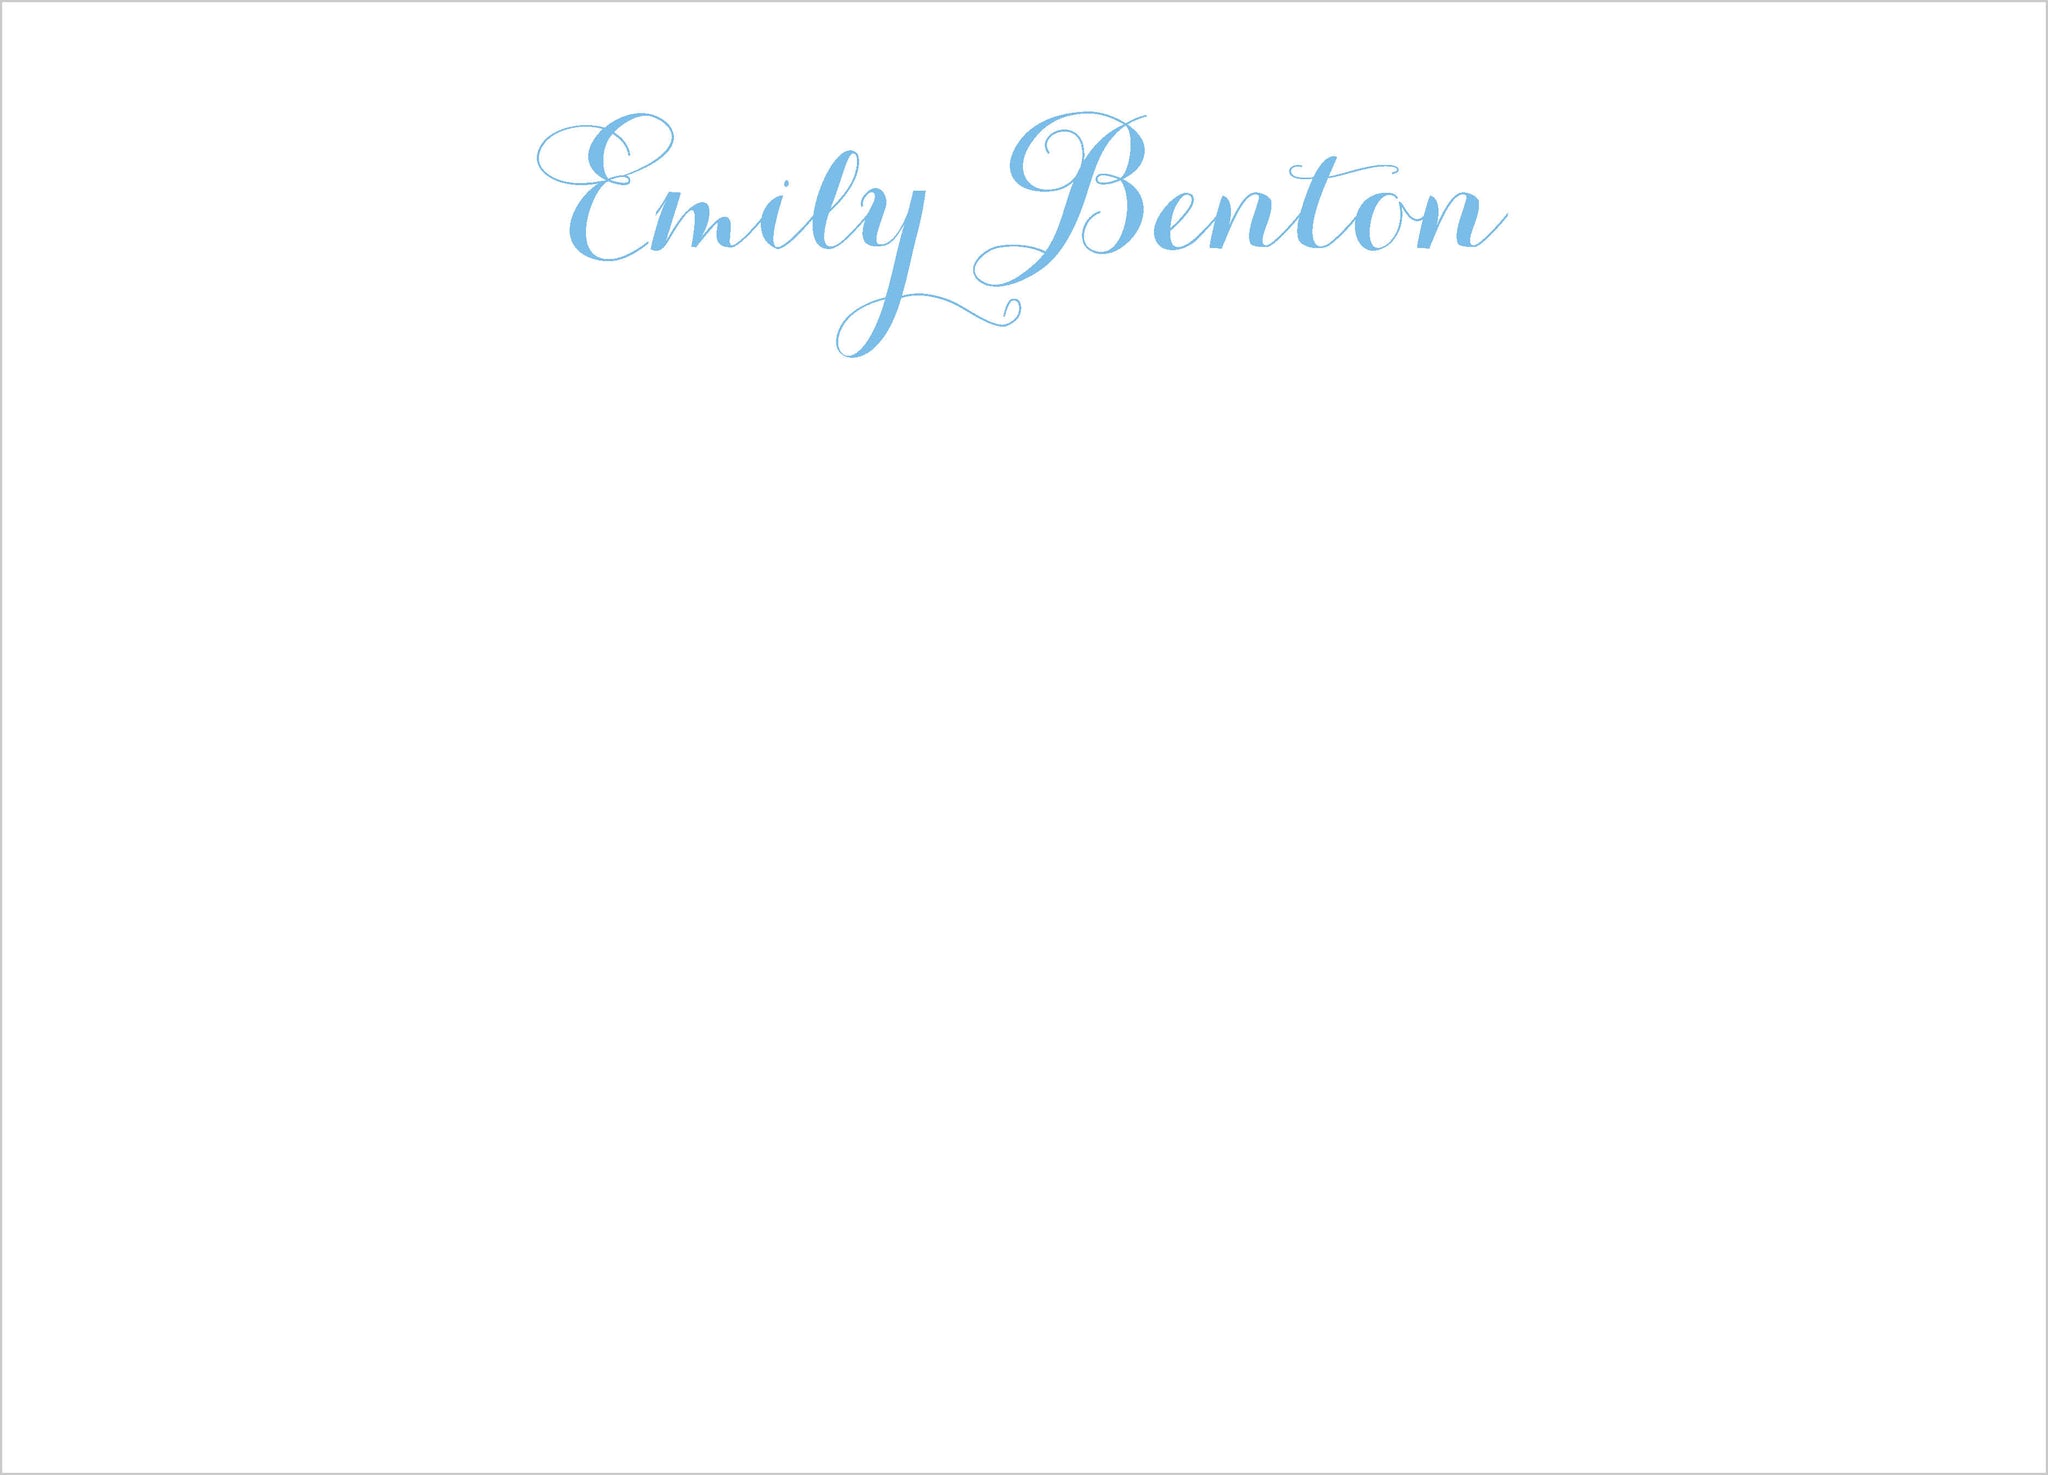 Emily Personalized Note Cards